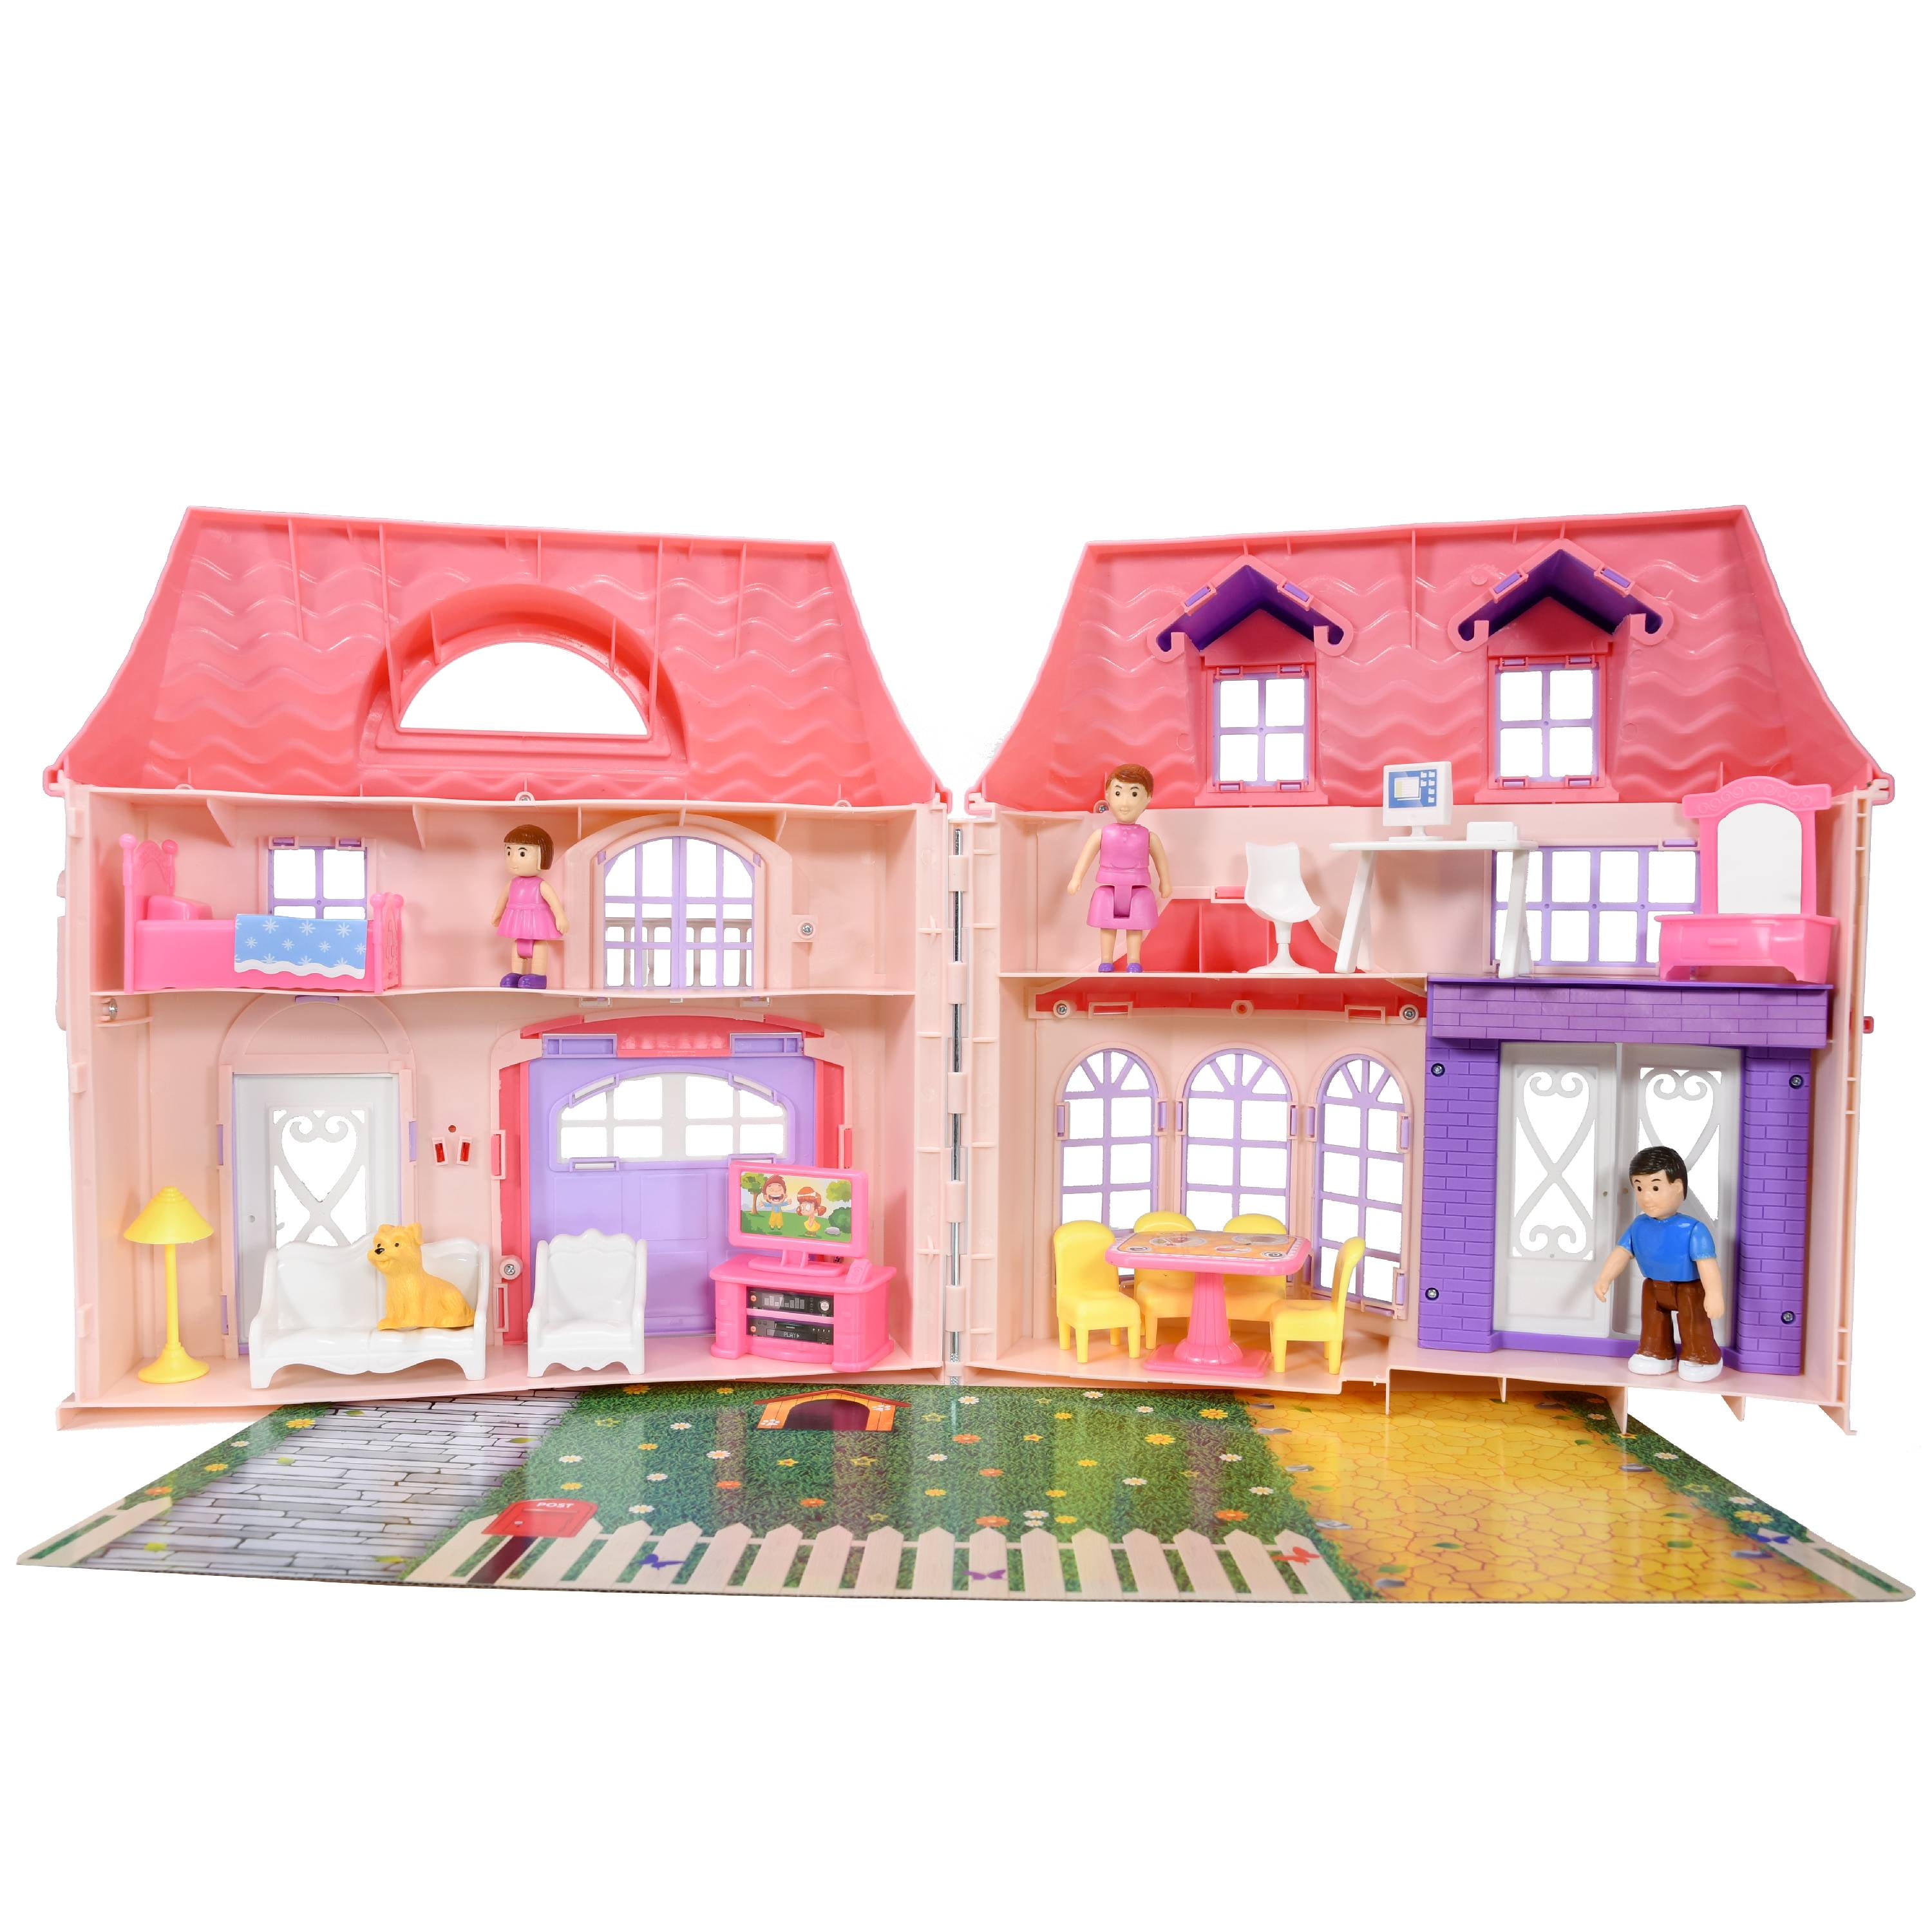 Boley Play Pretend Doll House Toy Free Shipping 21 pc collapsible dollhouse.. 